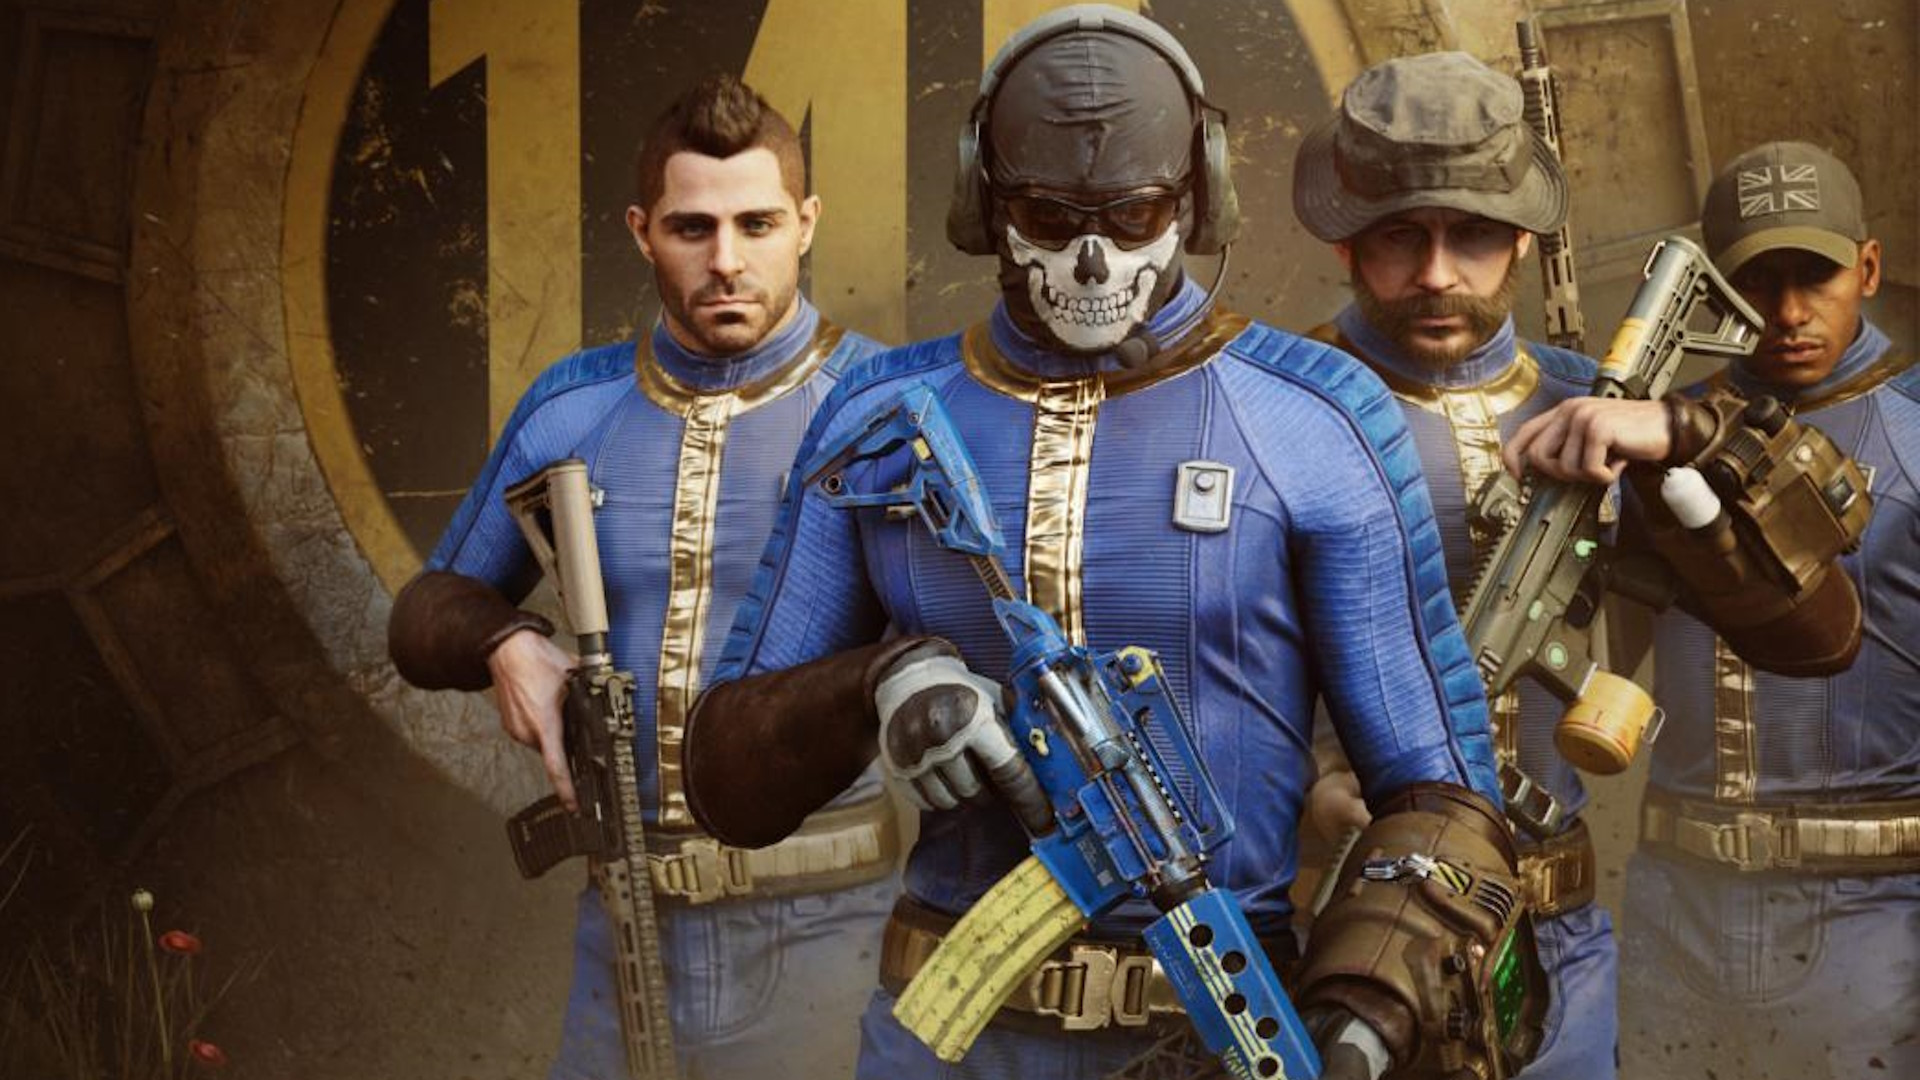  Call of Duty's new Fallout crossover dresses up Price and the lads in stretchy blue jammies, and I'm sorry but it's not a great look 